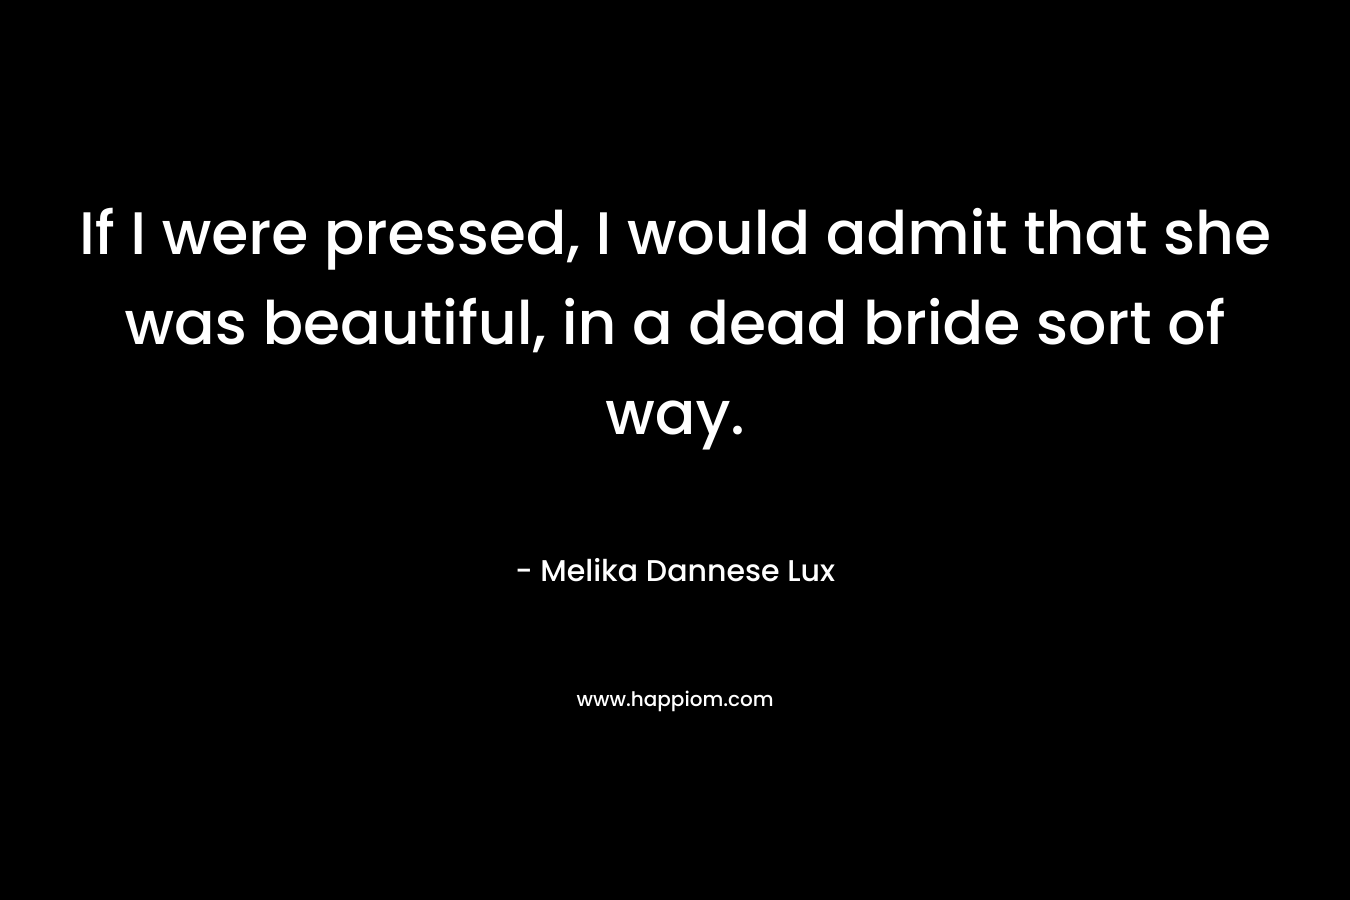 If I were pressed, I would admit that she was beautiful, in a dead bride sort of way.